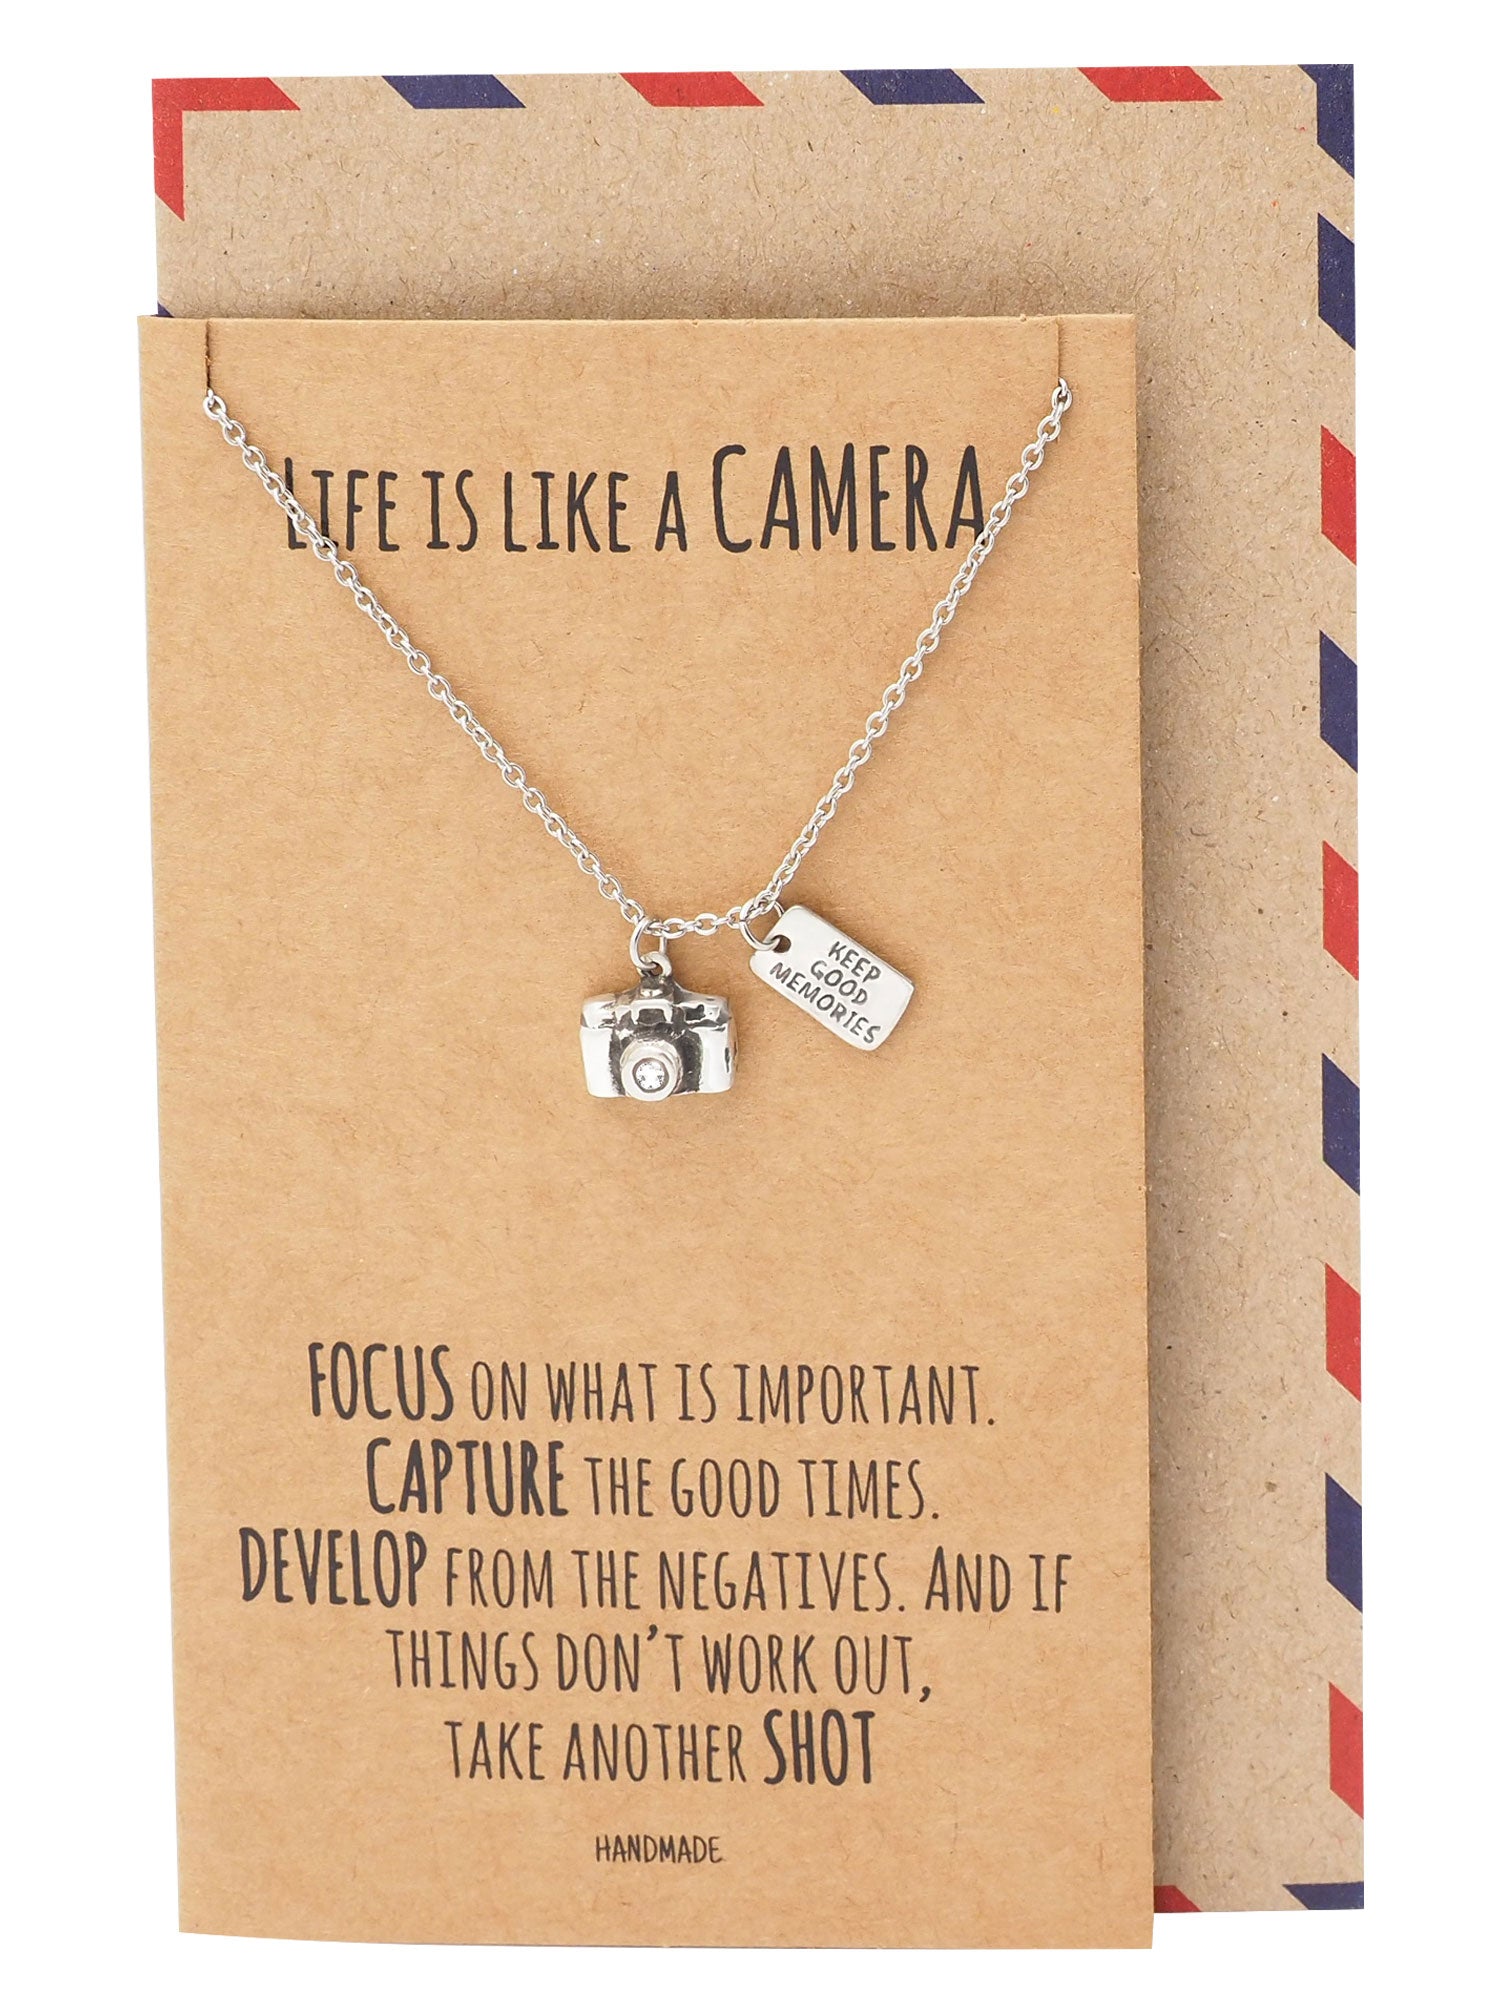 Ida Cute Camera Miniature Pendant Necklace for Women, Selfie Lovers, With Inspirational Quote Card